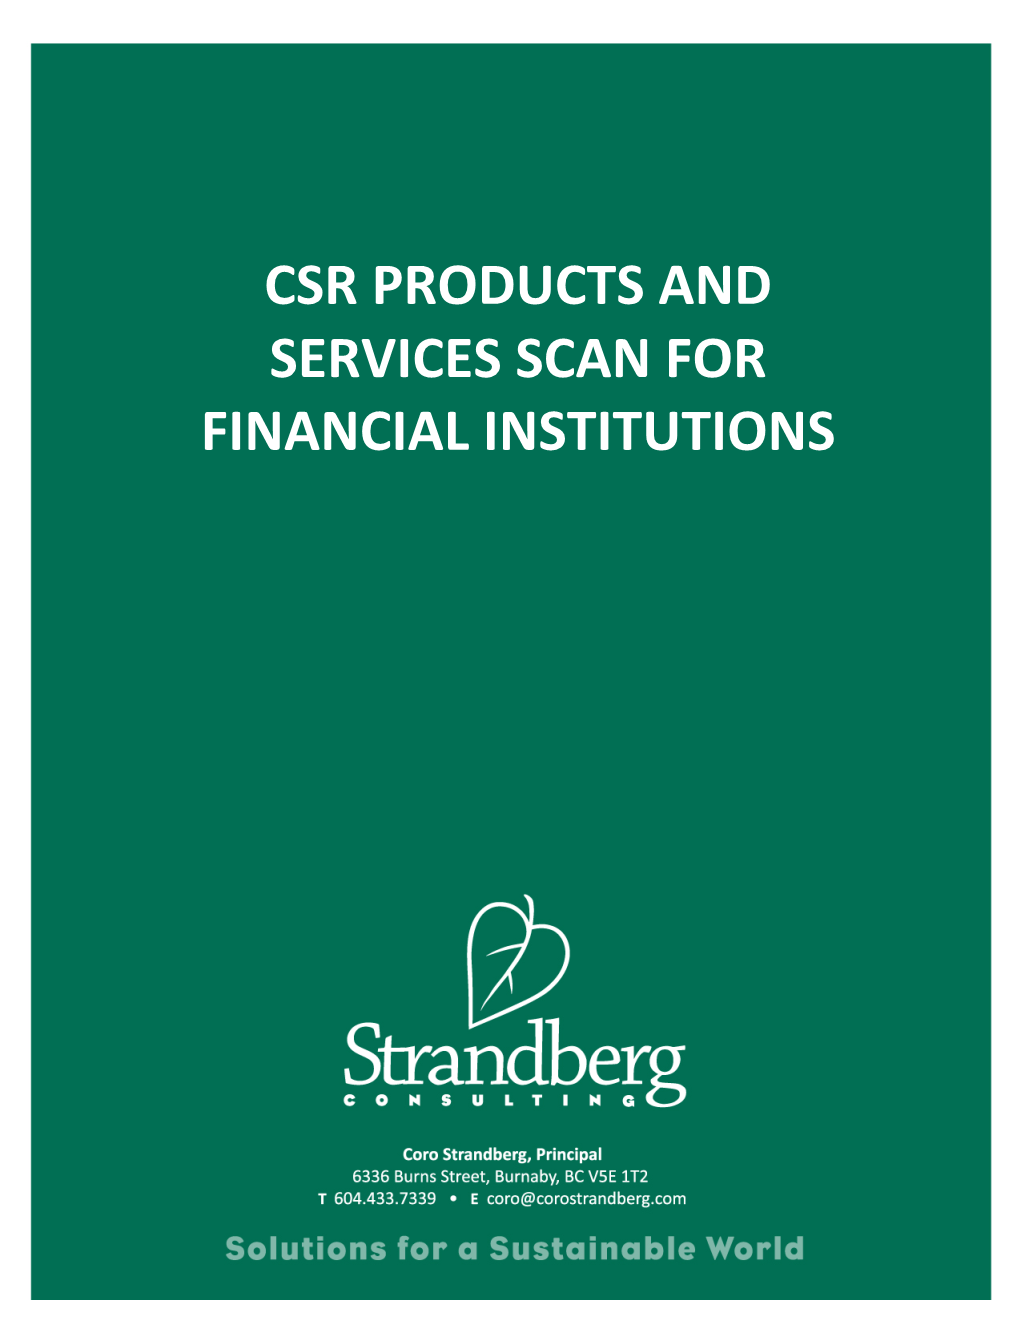 Csr Products and Services Scan for Financial Institutions